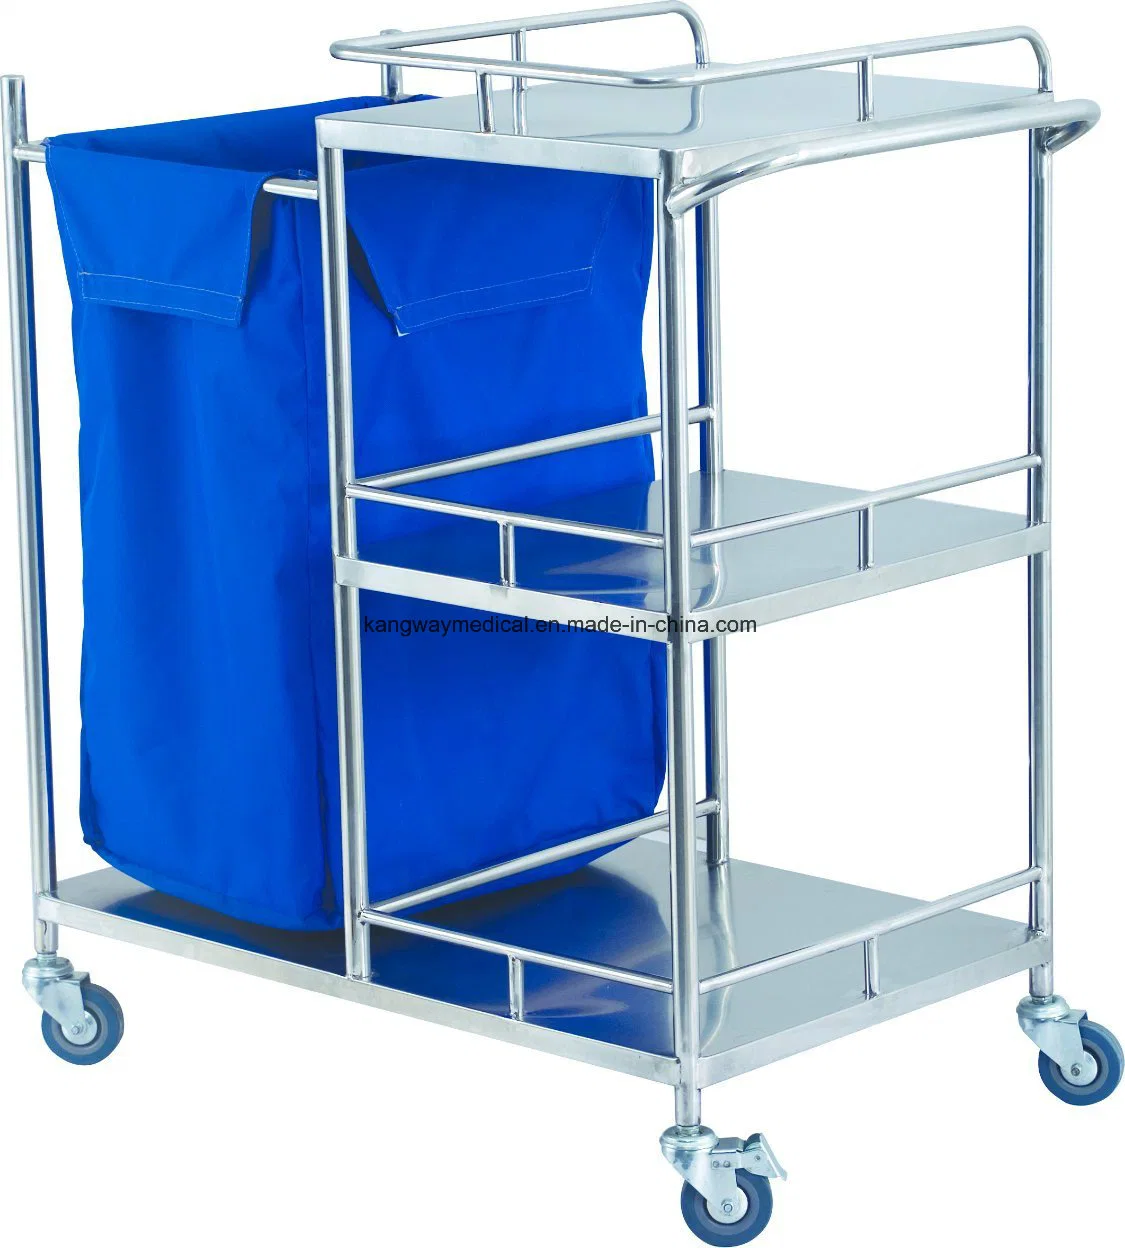 Hospital Furniture Stainless Steel Medical Trolley Cart with ISO Approved (SLV-C4025)